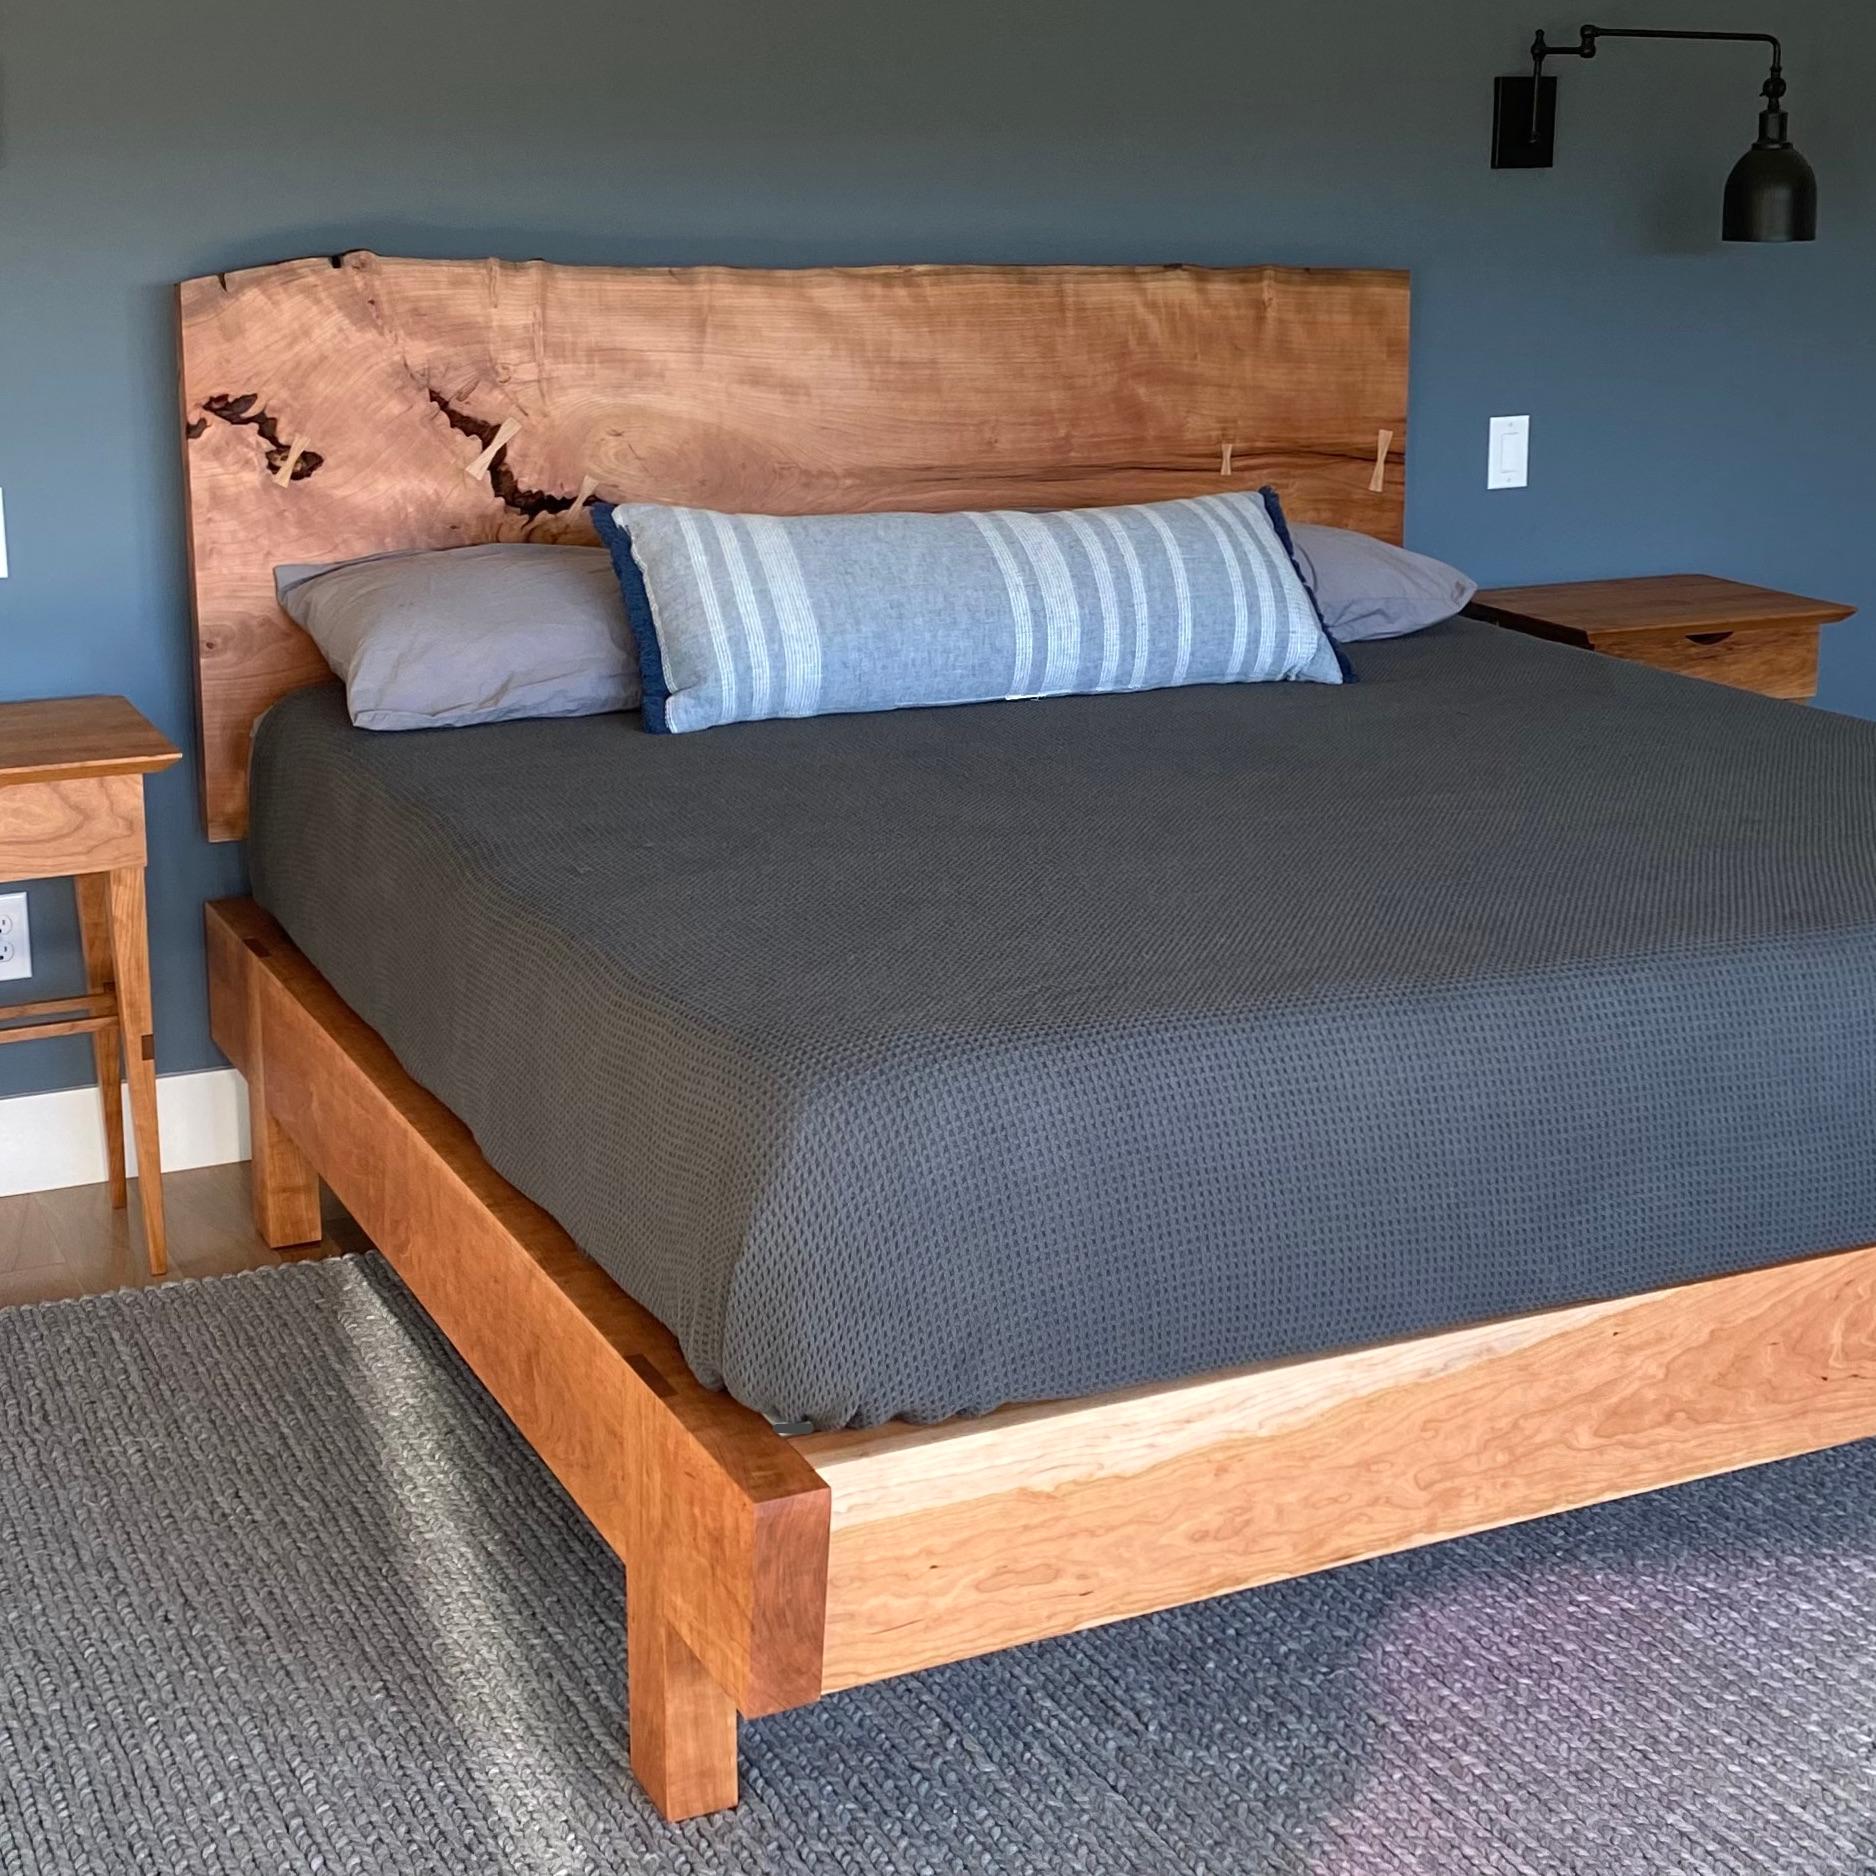 Hand-Crafted Queen Sized Platform Maple Perri Bed with Live-Edge Slab Headboard For Sale